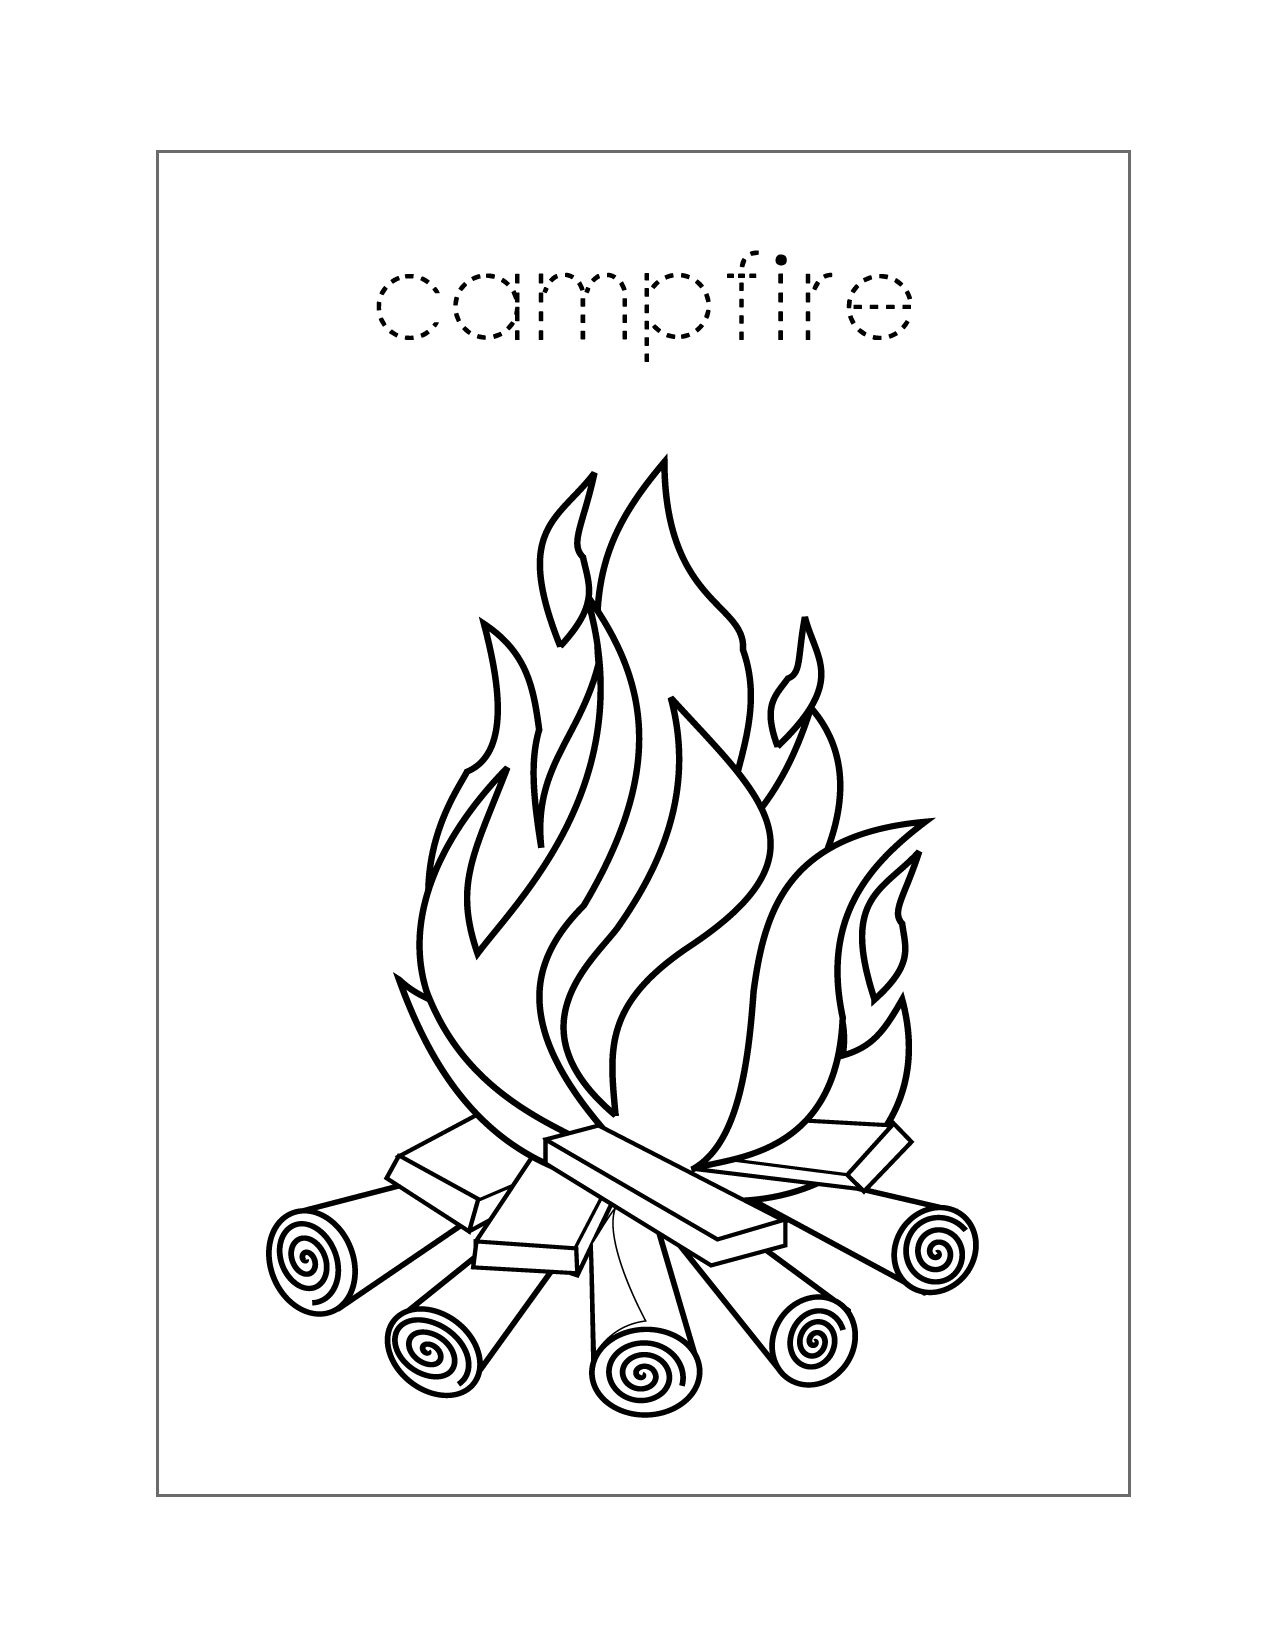 Campfire Spelling Page